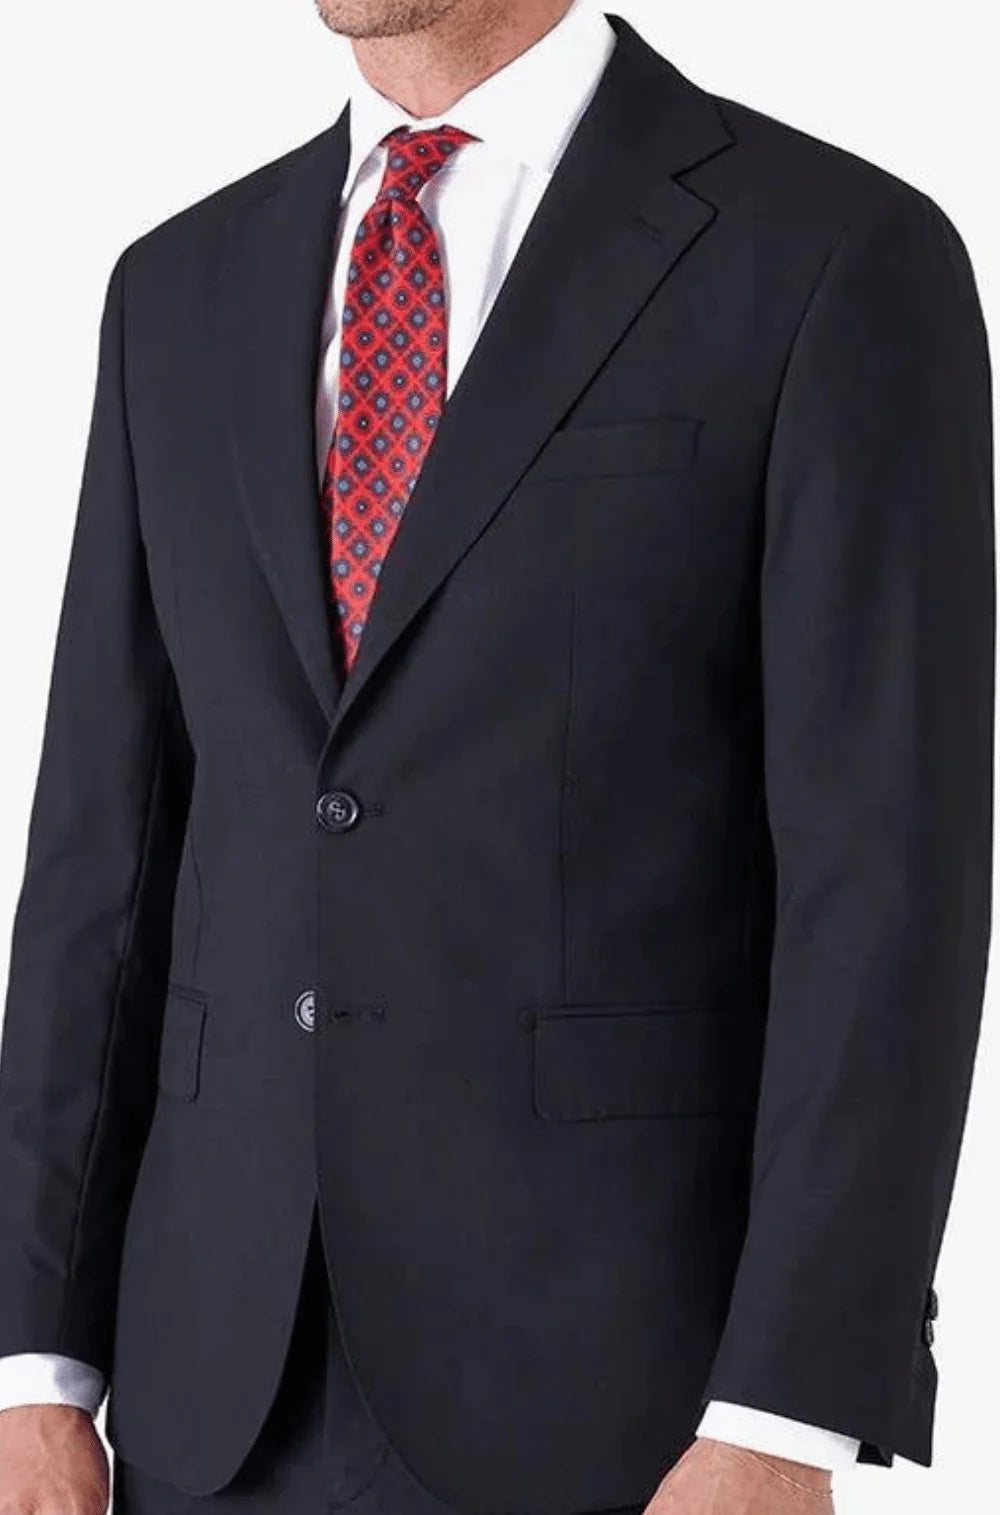 Men's Fusaro Max Classic Wool Blend Suit In Black (21107) - available in-store, 337 Monty Naicker Street, Durban CBD or online at Omar's Tailors & Outfitters online store.   A men's fashion curation for South African men - established in 1911.